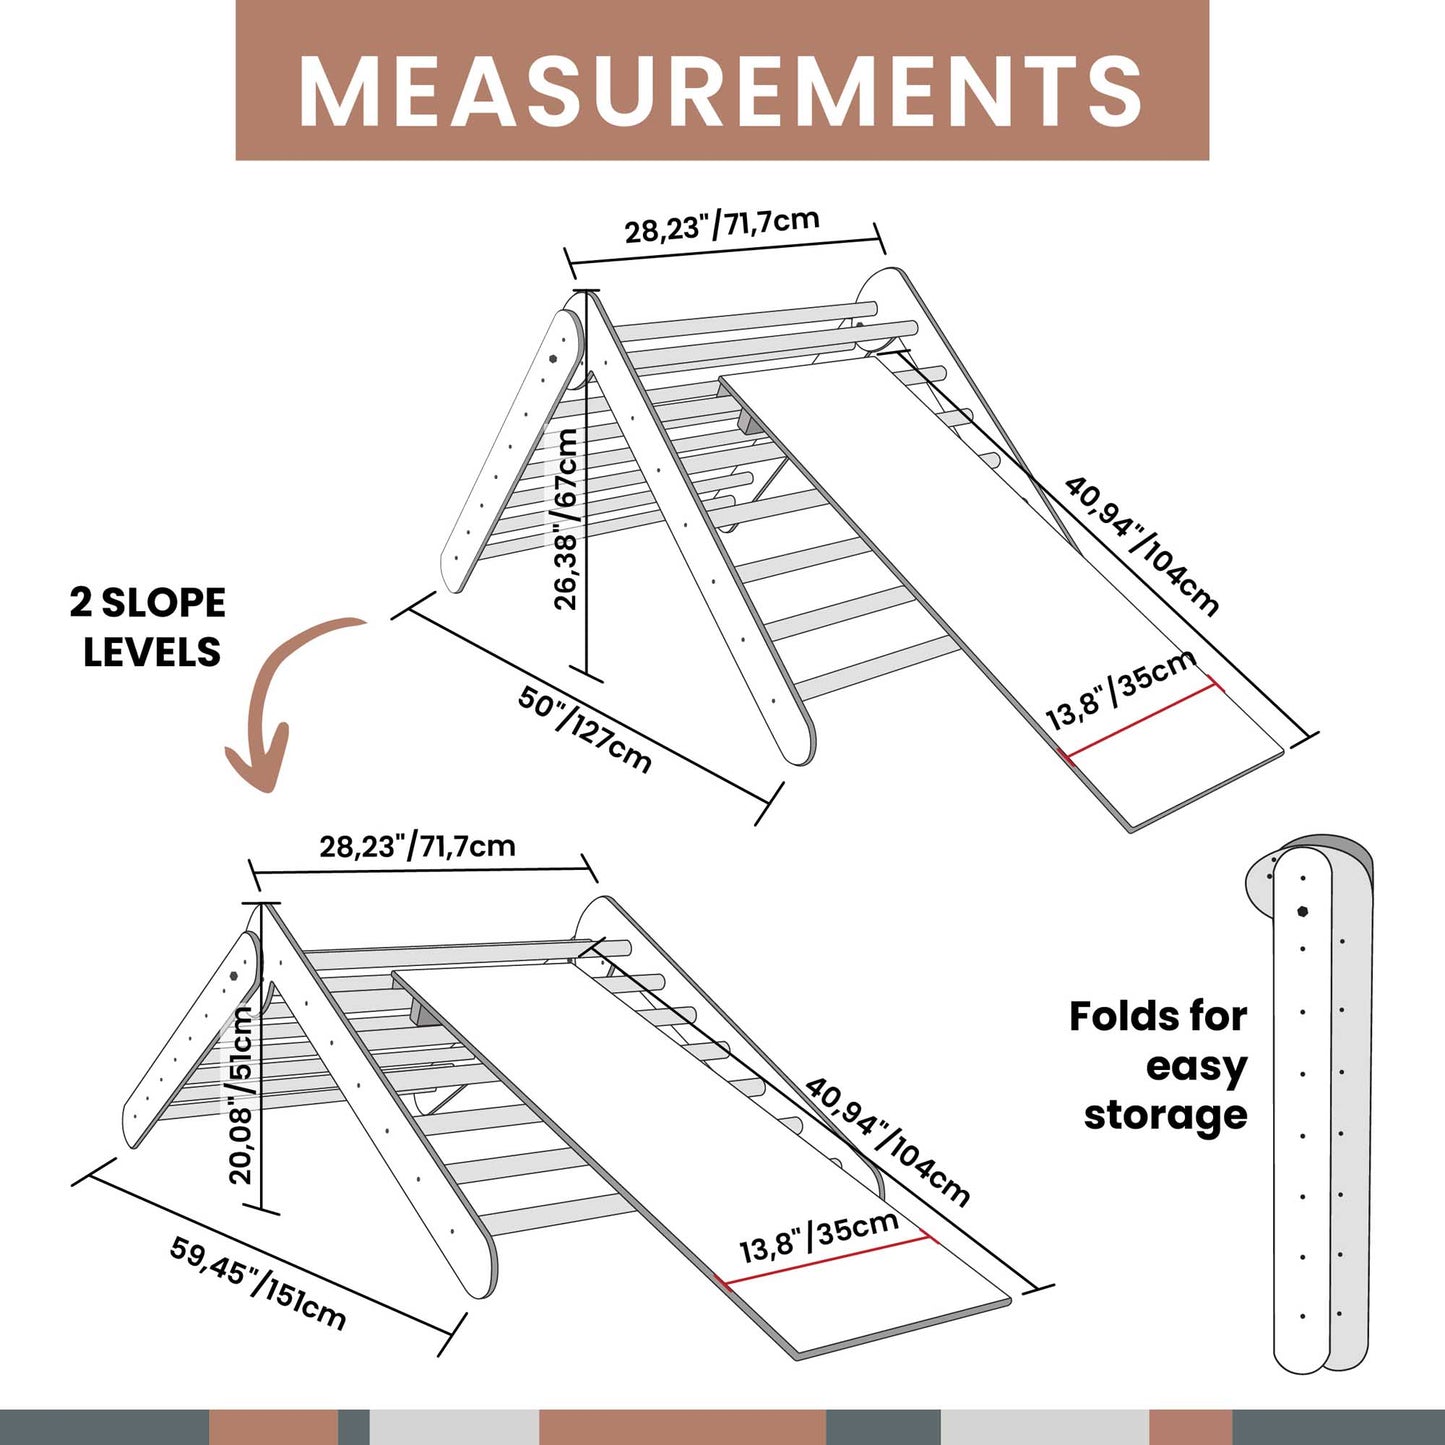 A diagram showing the measurements of a Foldable climbing triangle + 2-in-1 cube / table and chair + a ramp.